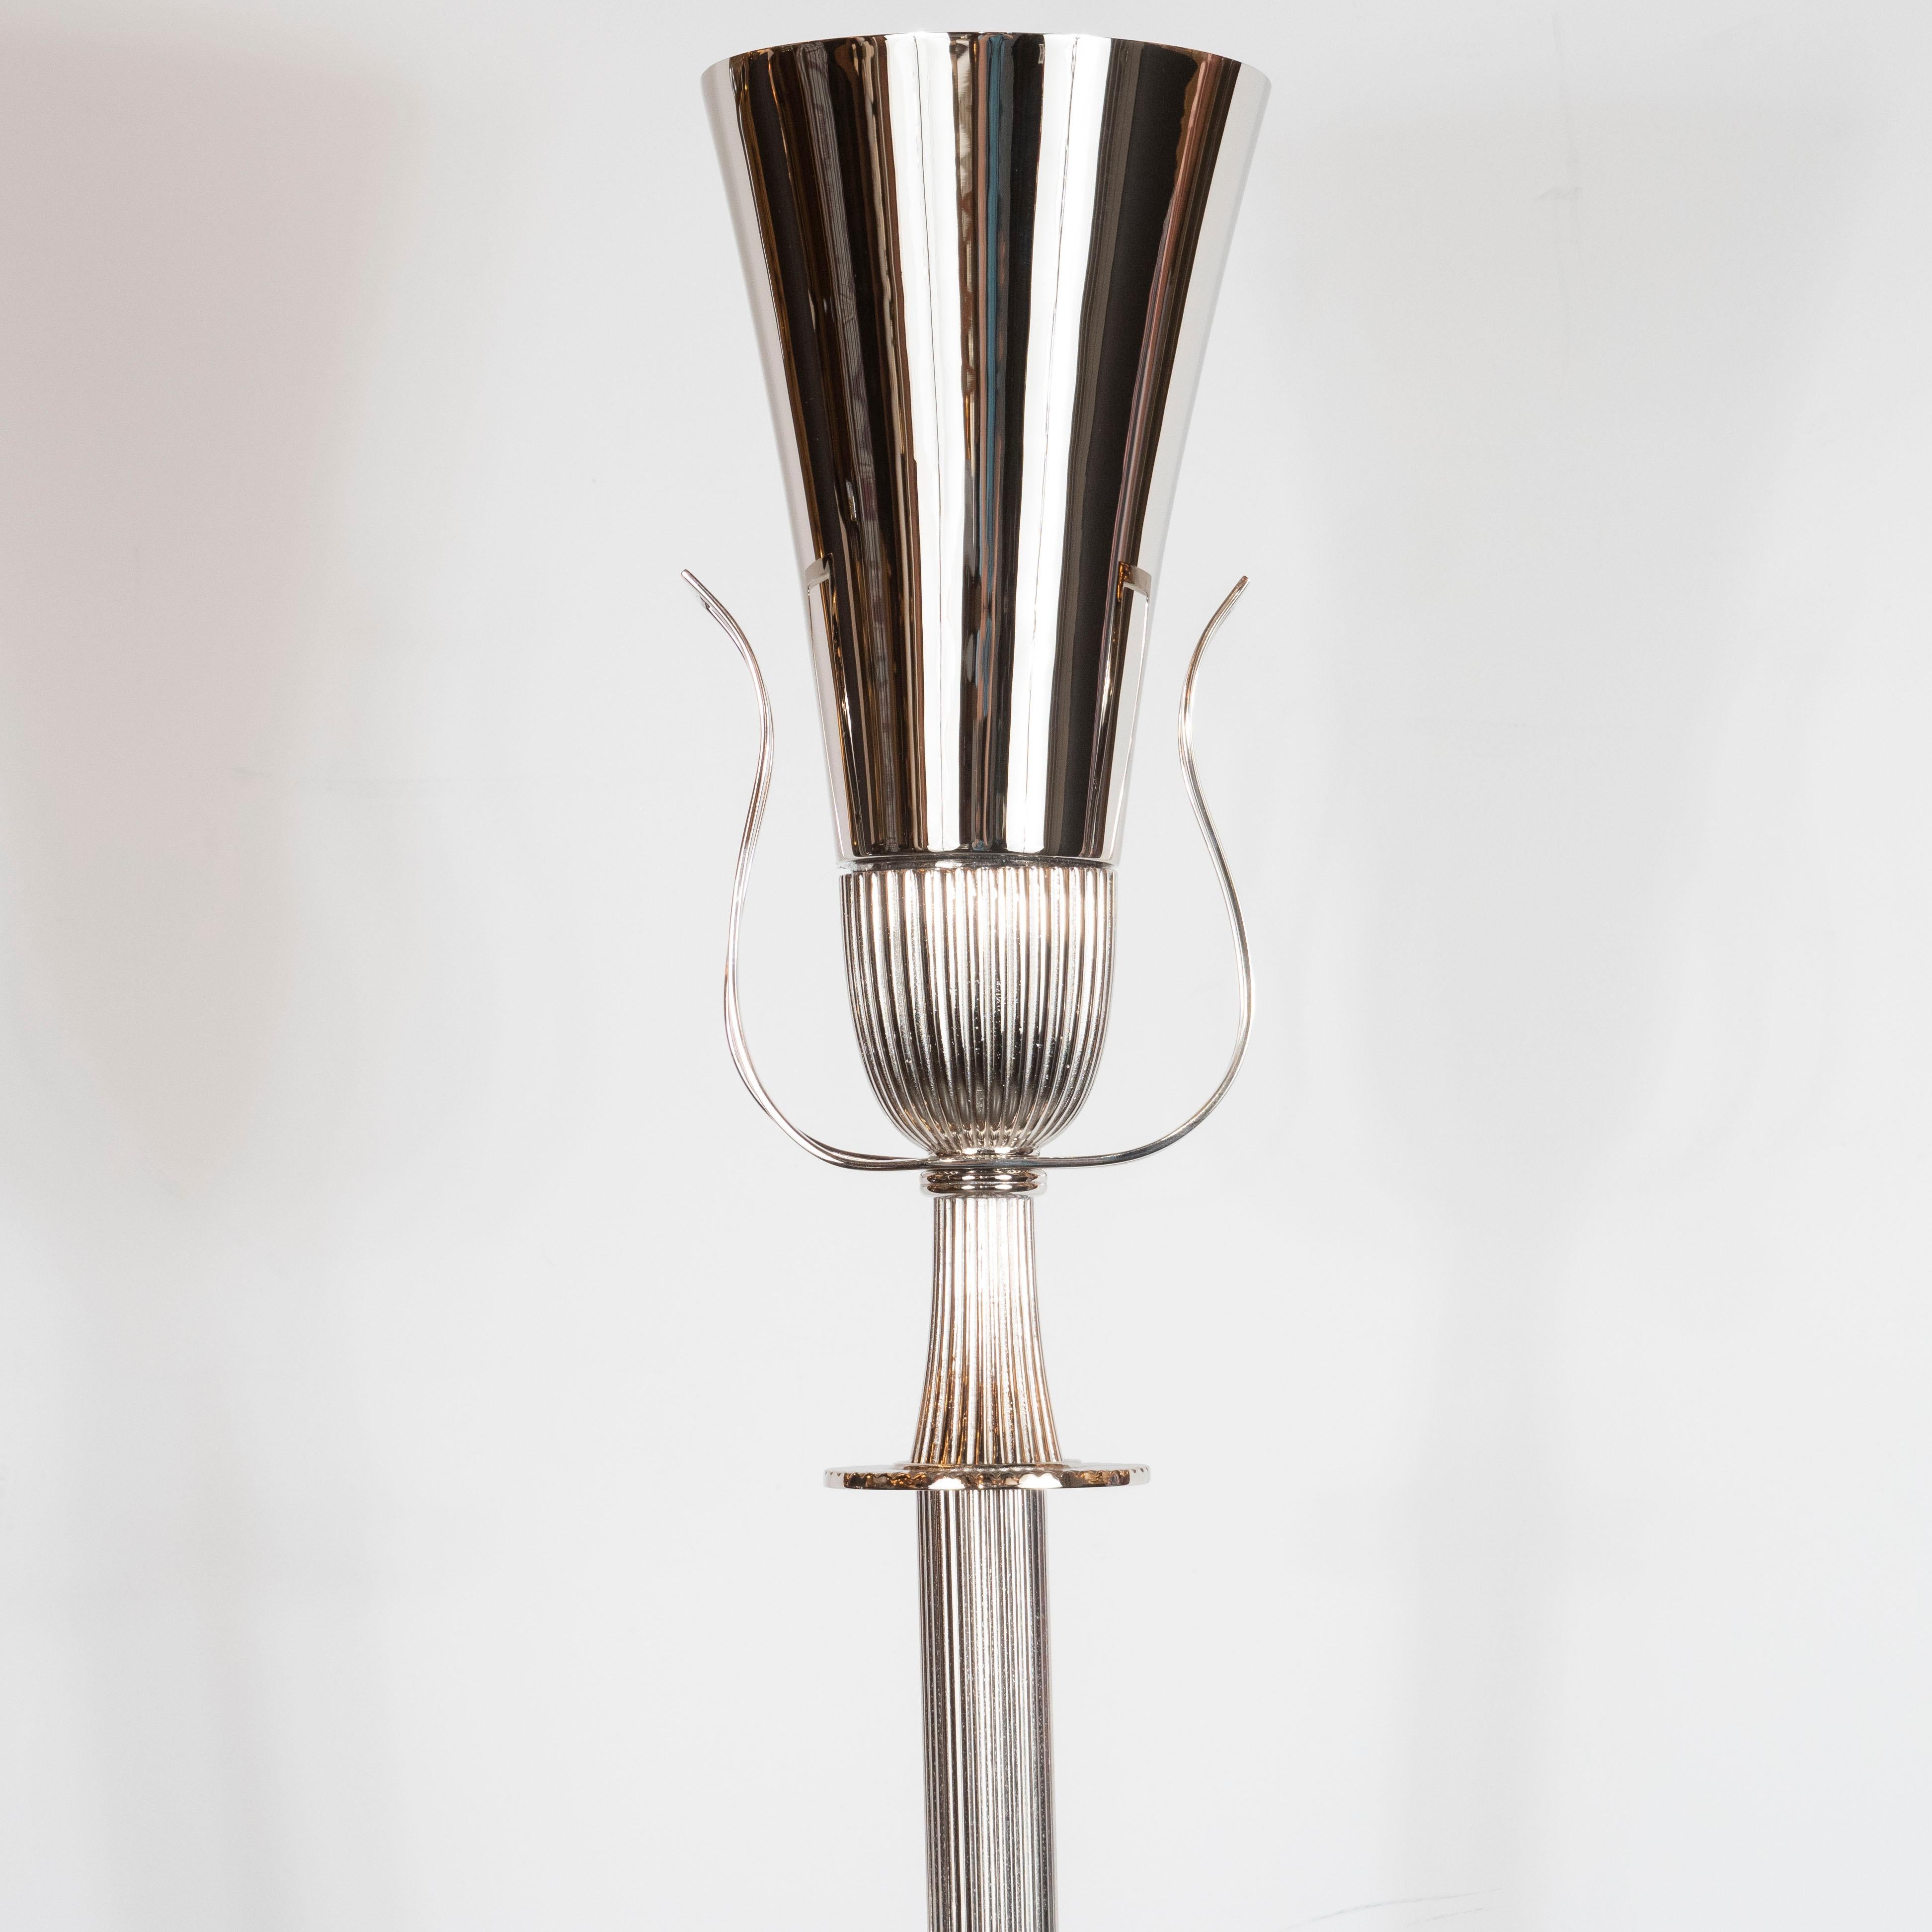 This elegant Mid-Century Modern torchère was realized by the fabled 20th century design luminary Tommi Parzinger in the United States, circa 1950. It features a reeded body that attaches to an hourglass form neck with undulating open form